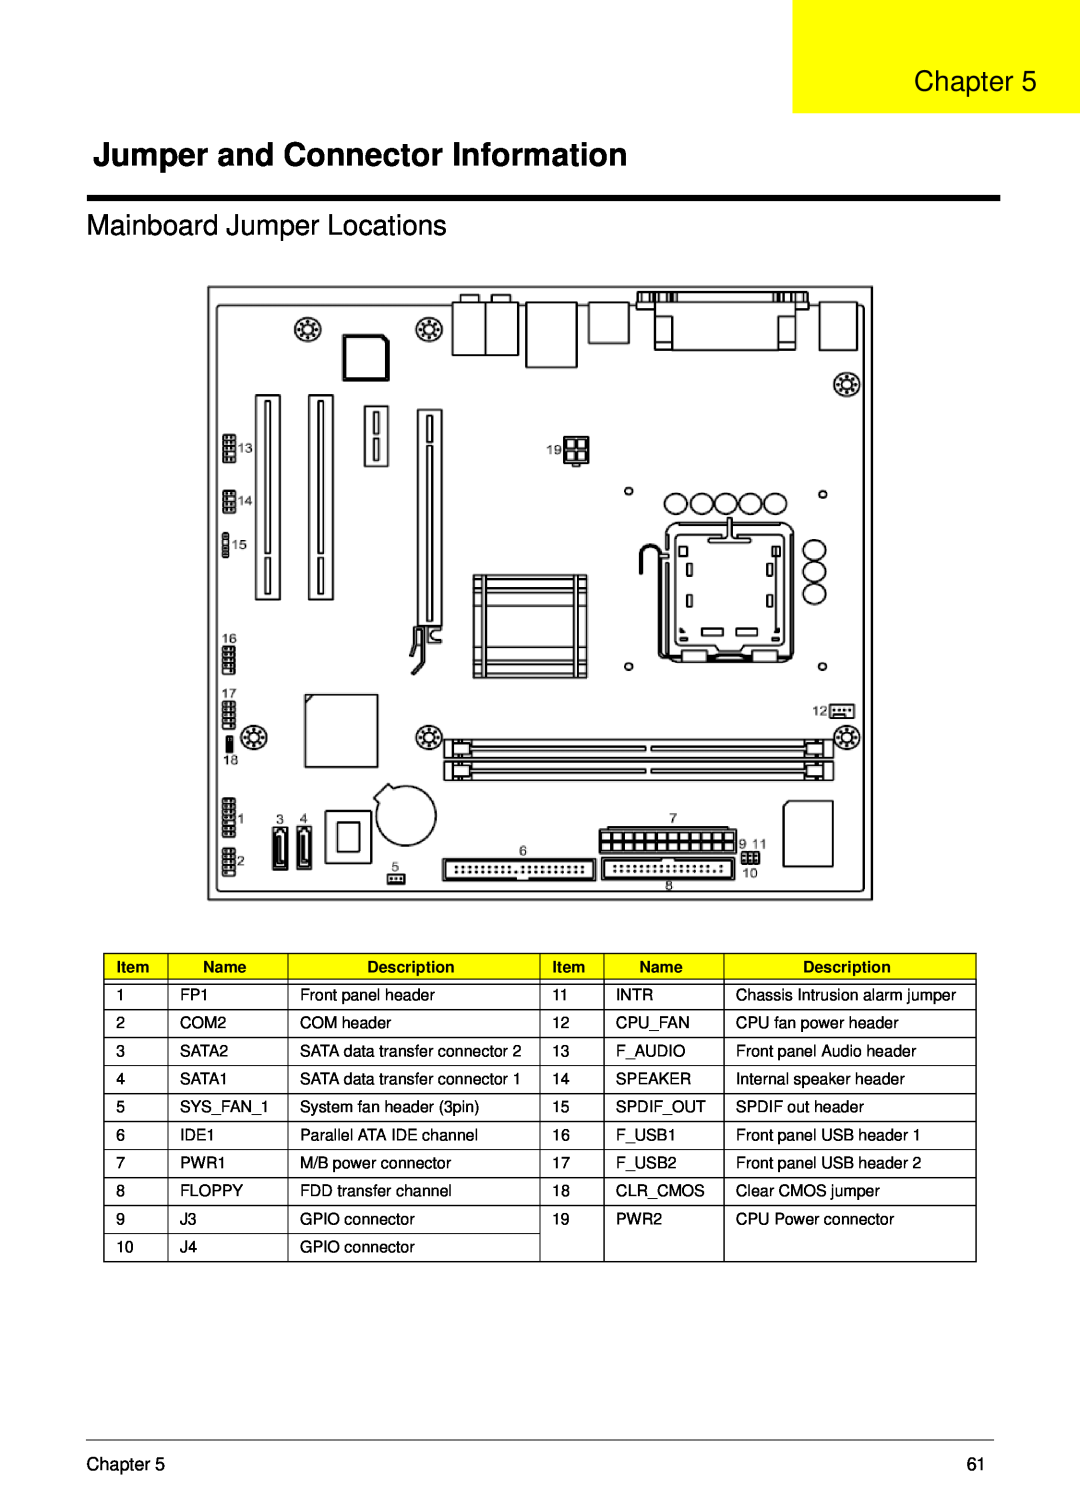 Aspire Digital M261, M1610 manual Jumper and Connector Information, Mainboard Jumper Locations, Chapter 